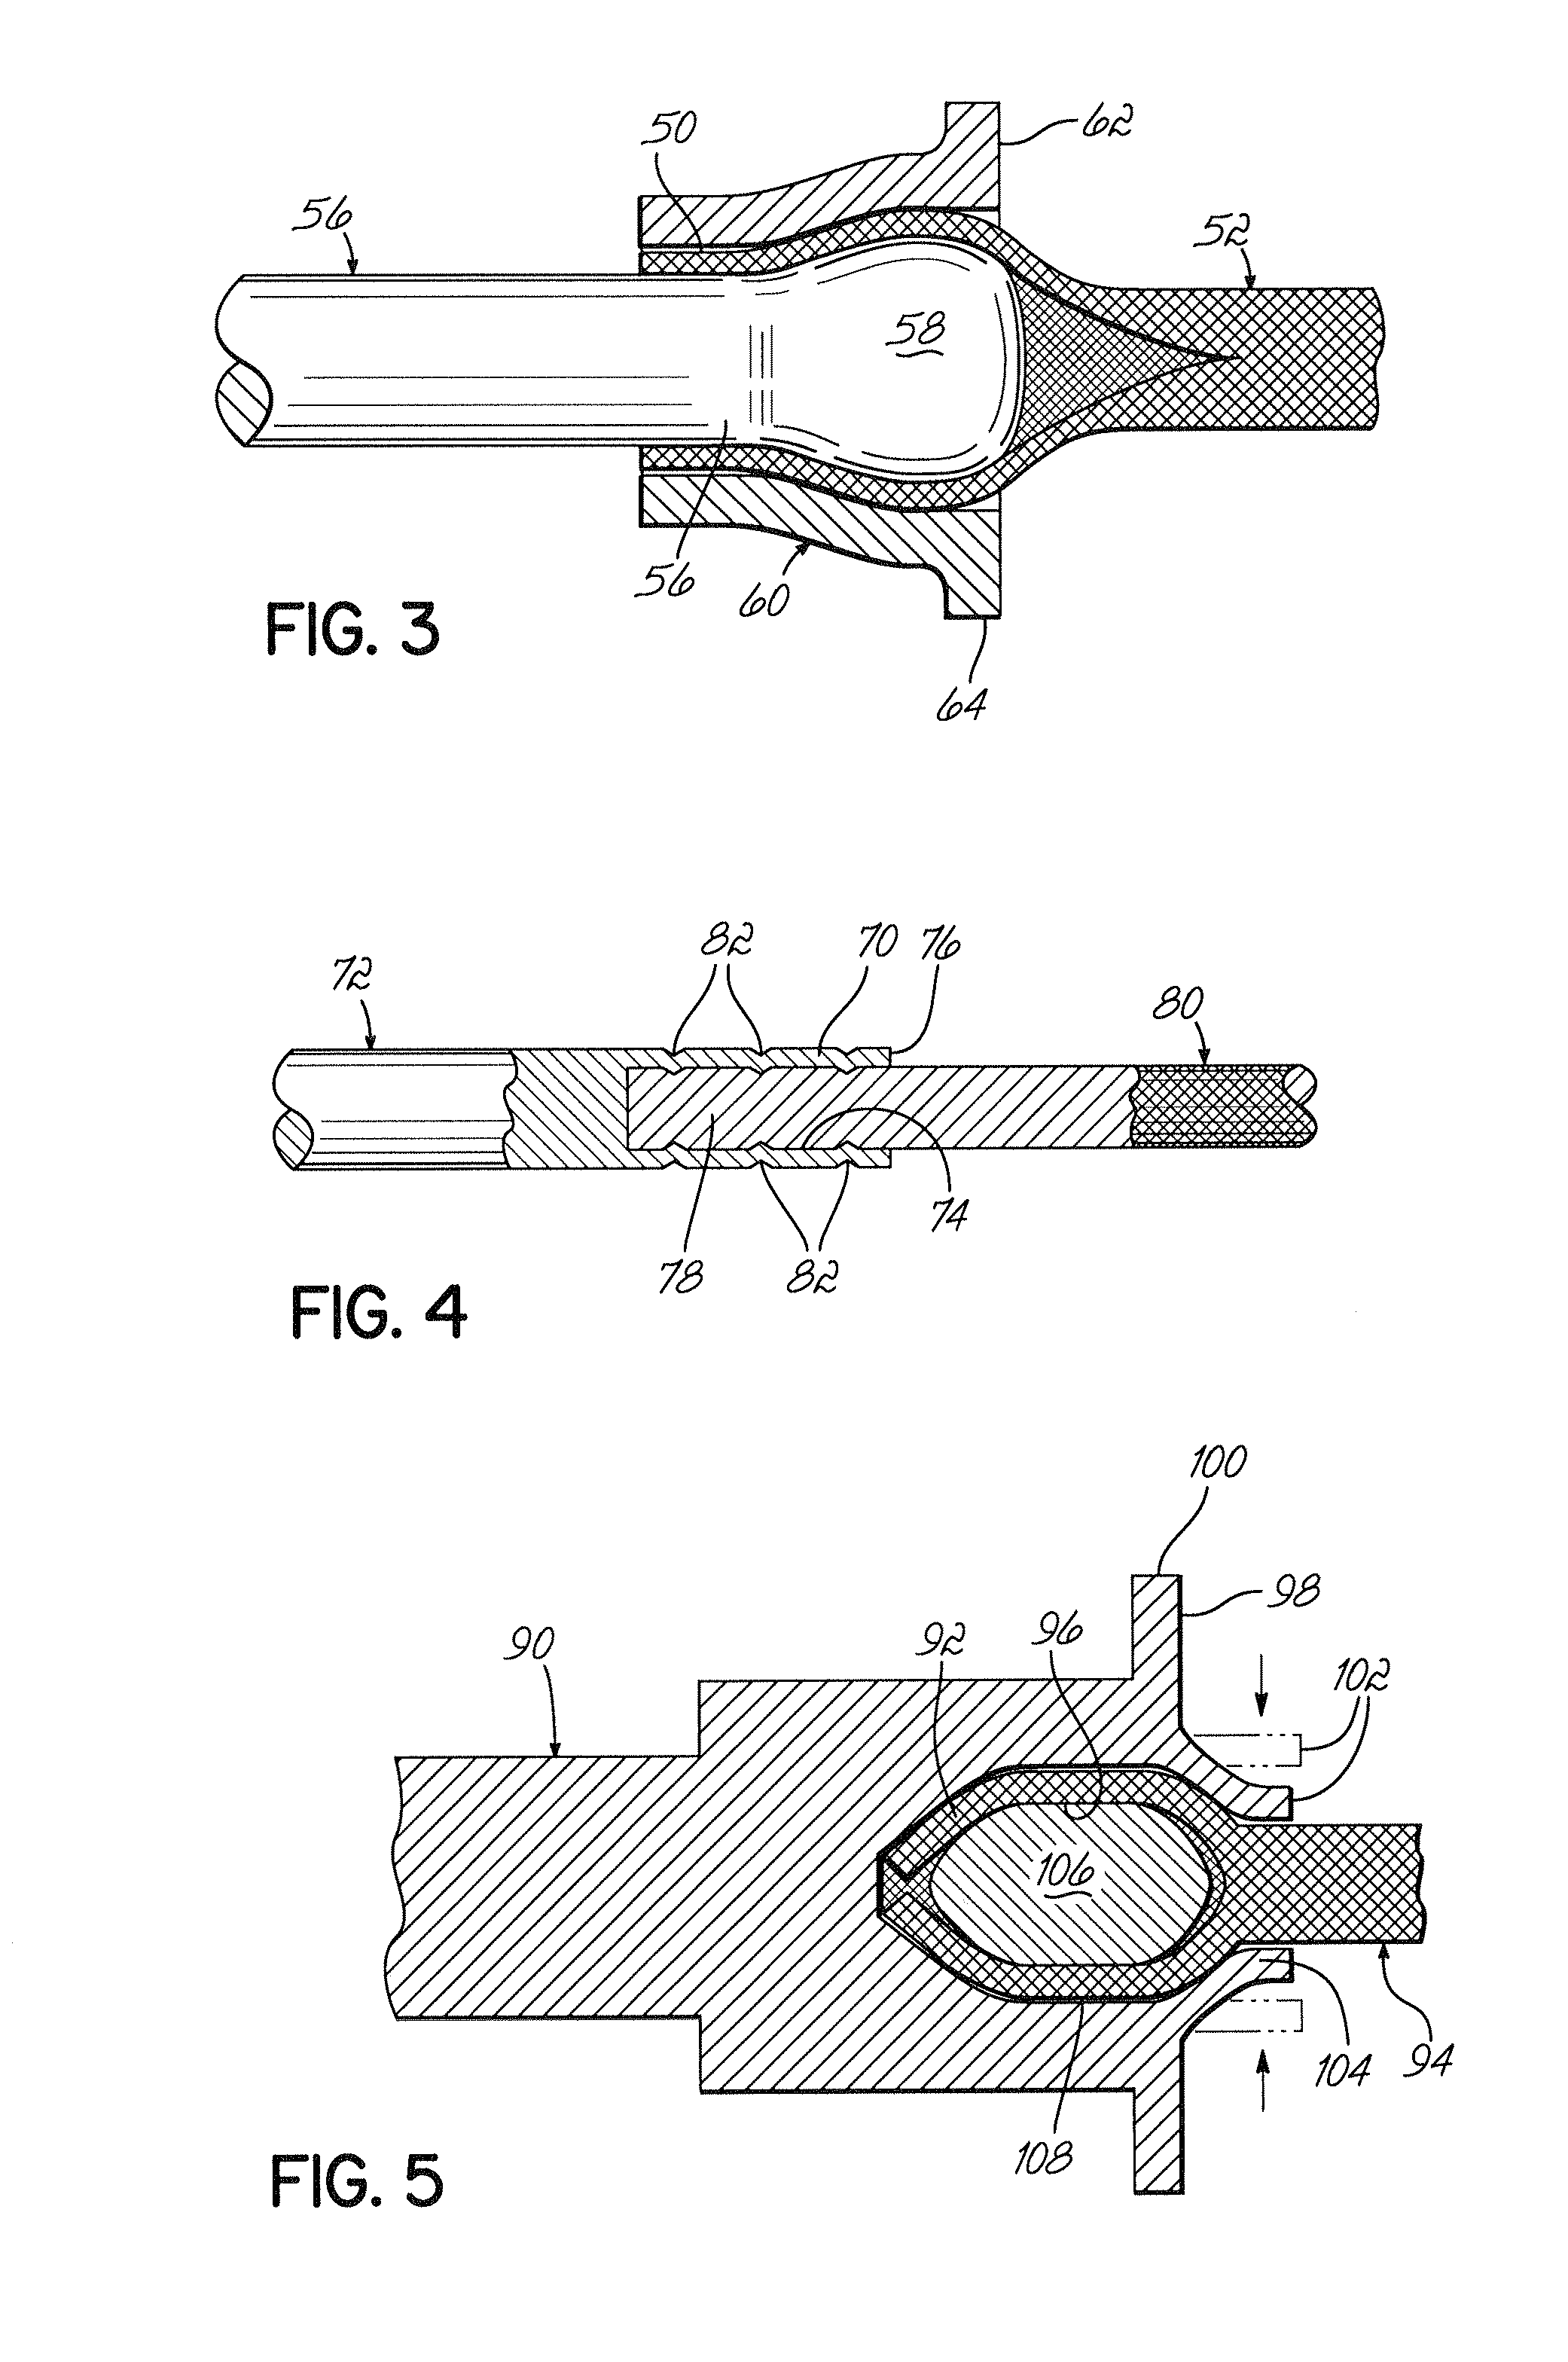 Spinal stabilization system with rigid and flexible elements